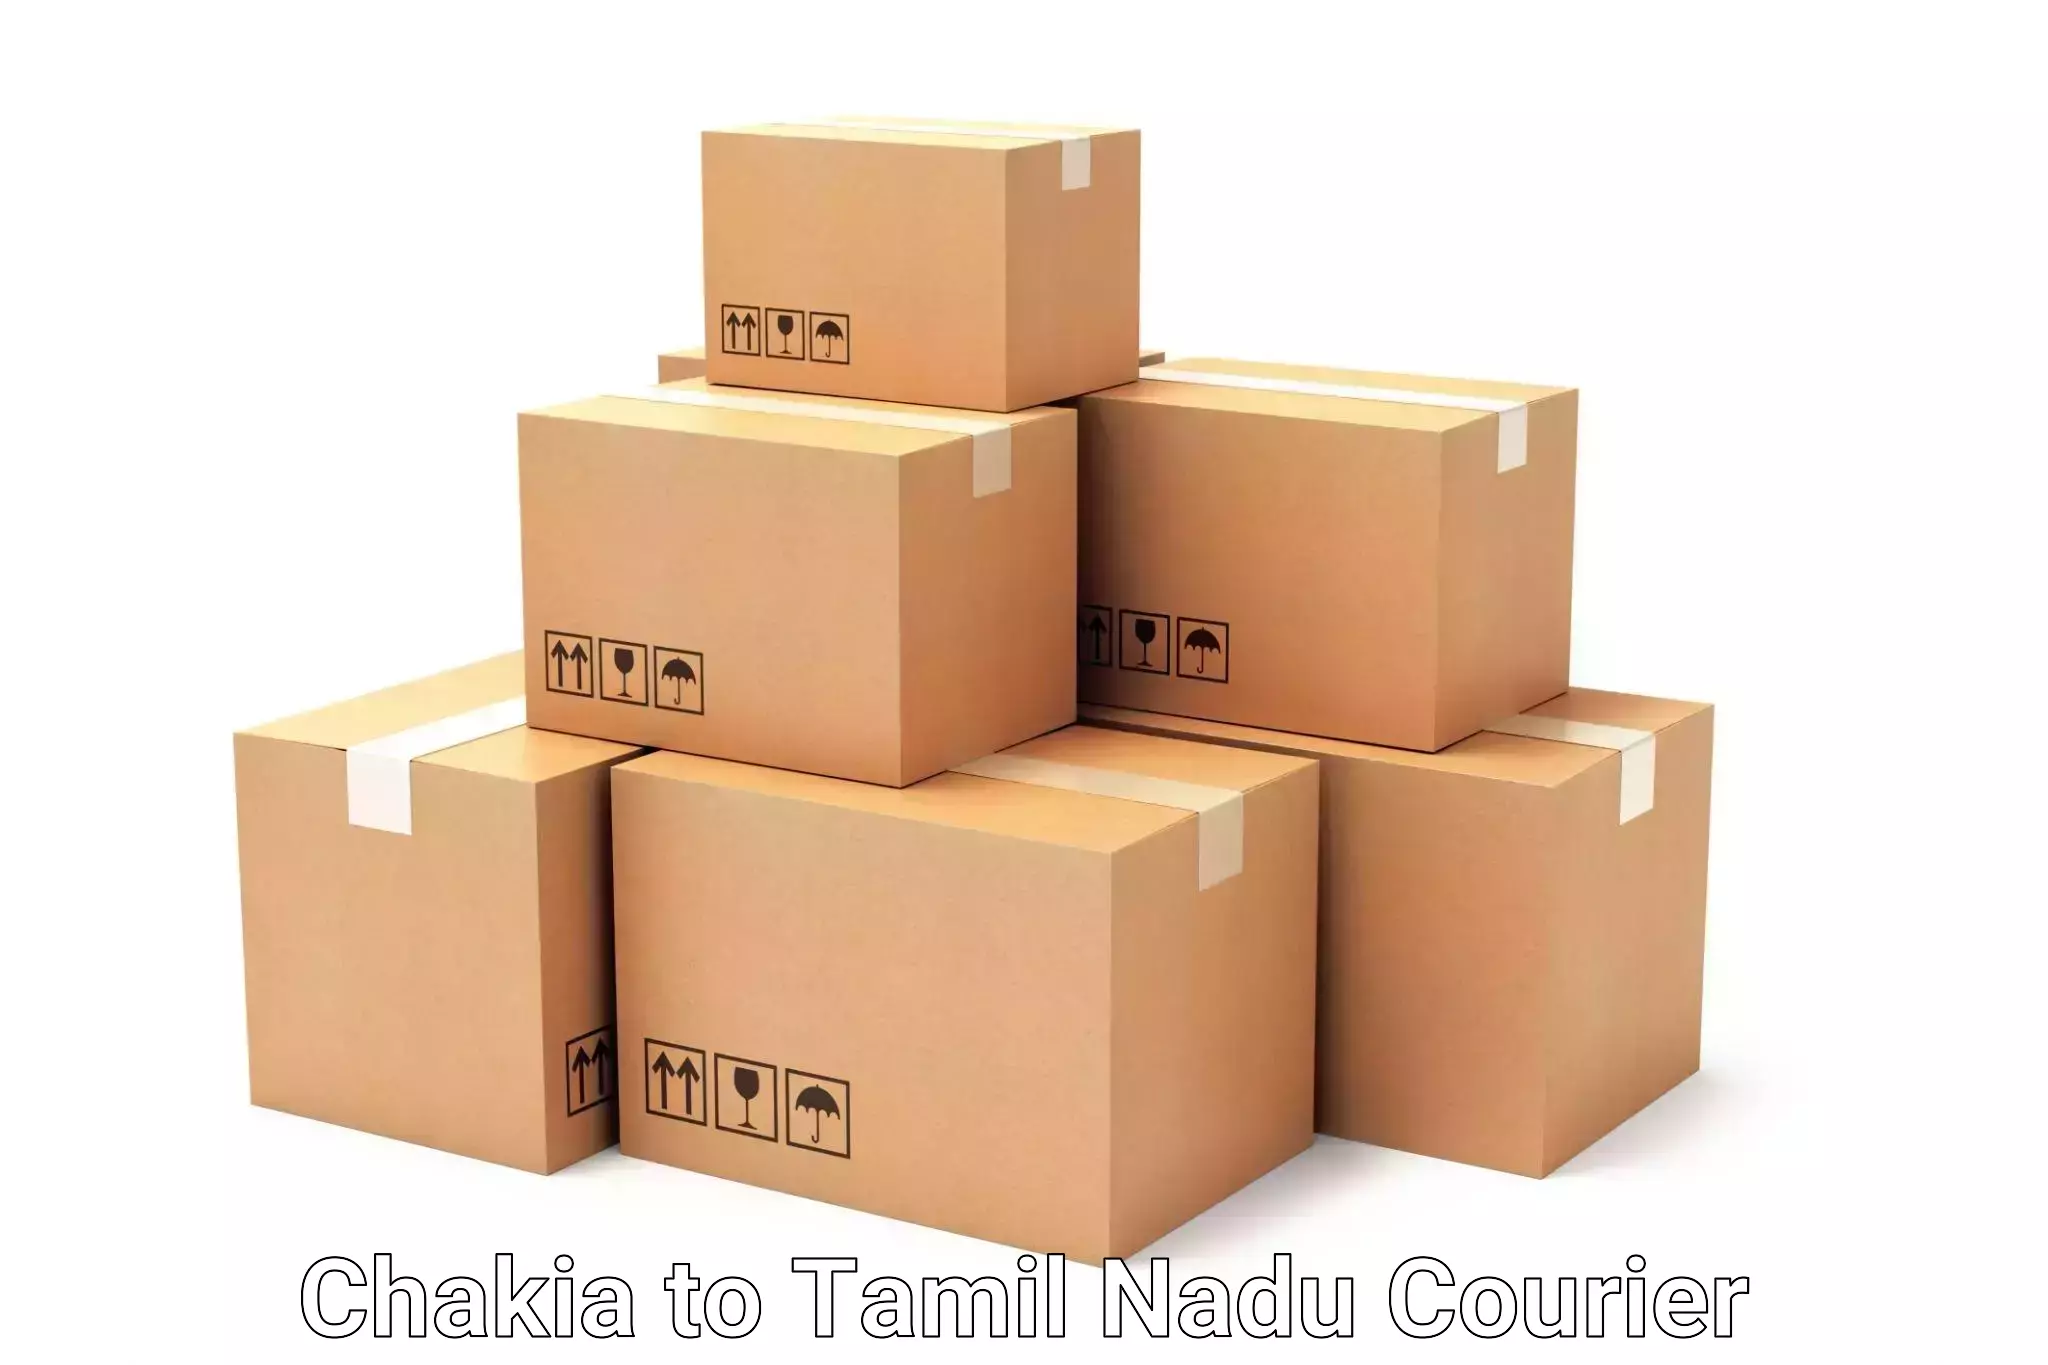 Timely baggage transport Chakia to Cumbum